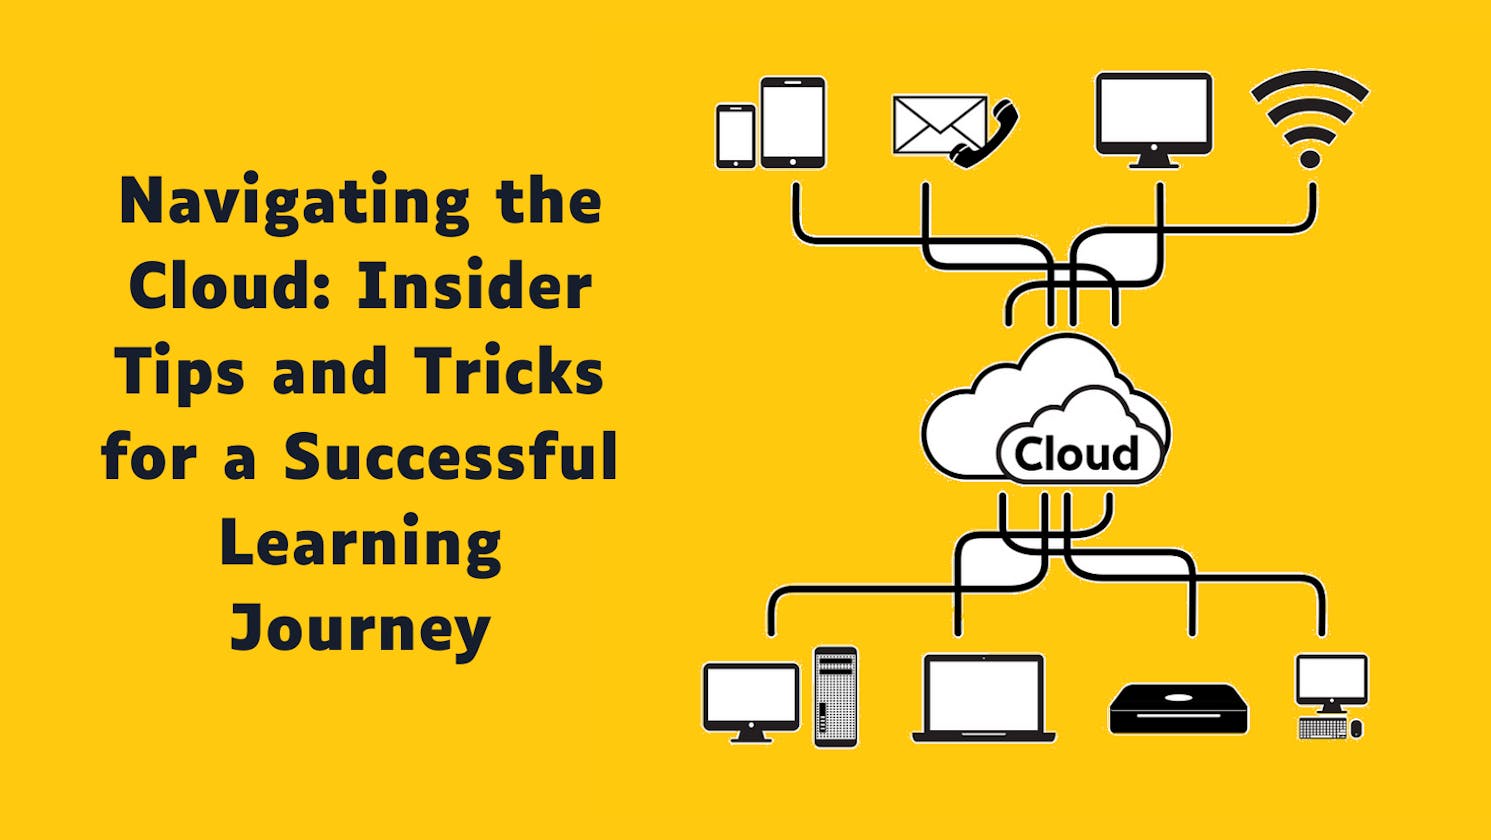 Navigating the Cloud: Insider Tips and Tricks for a Successful Learning Journey